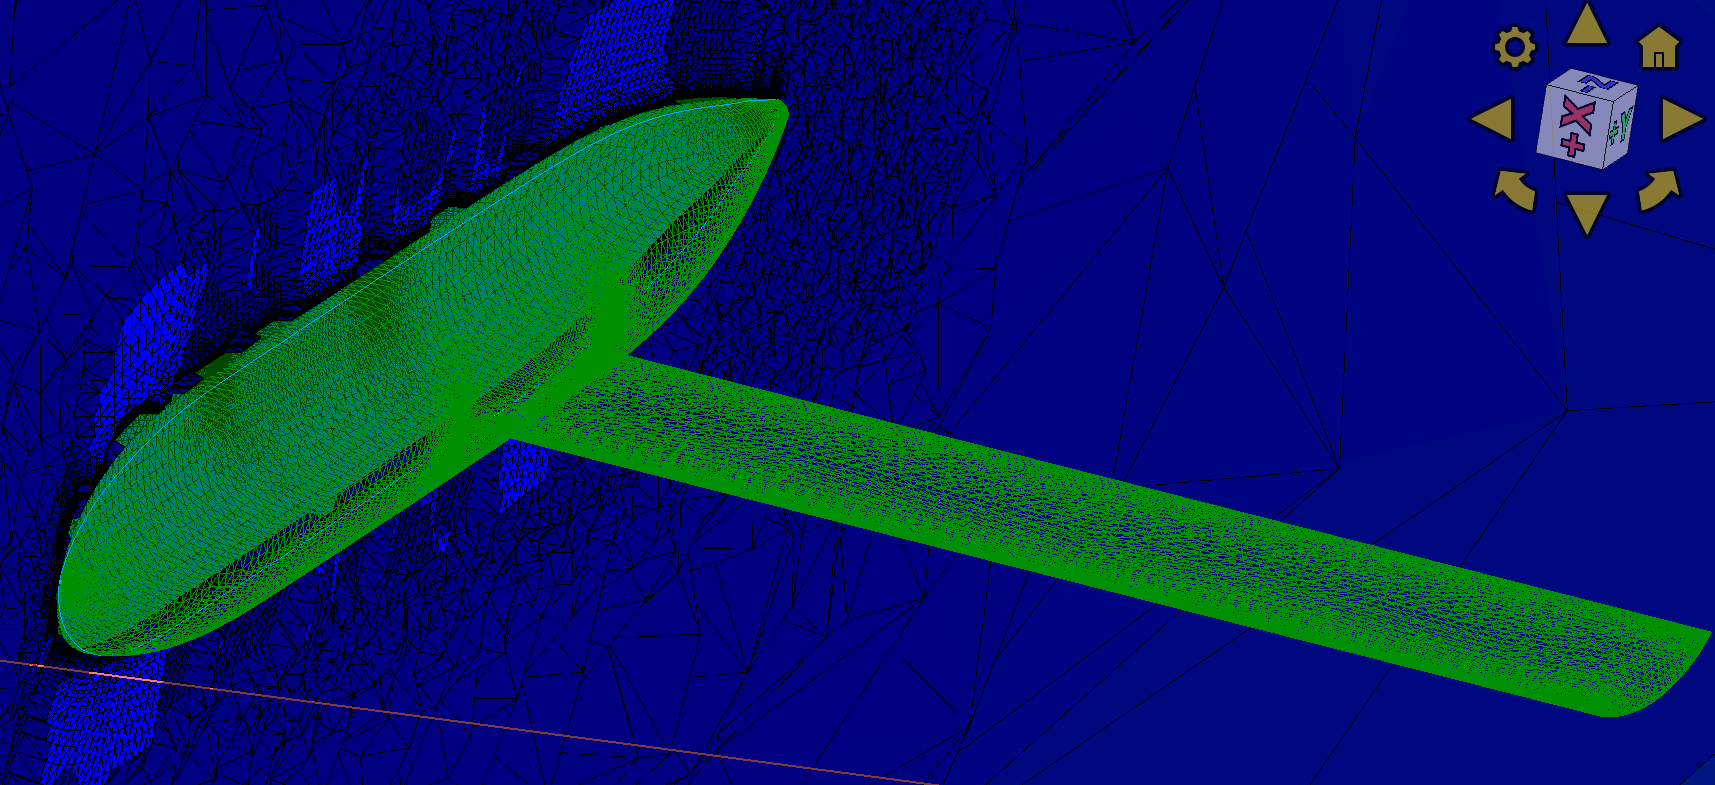 Pointwise volume mesh is generated using the TRex algorithm